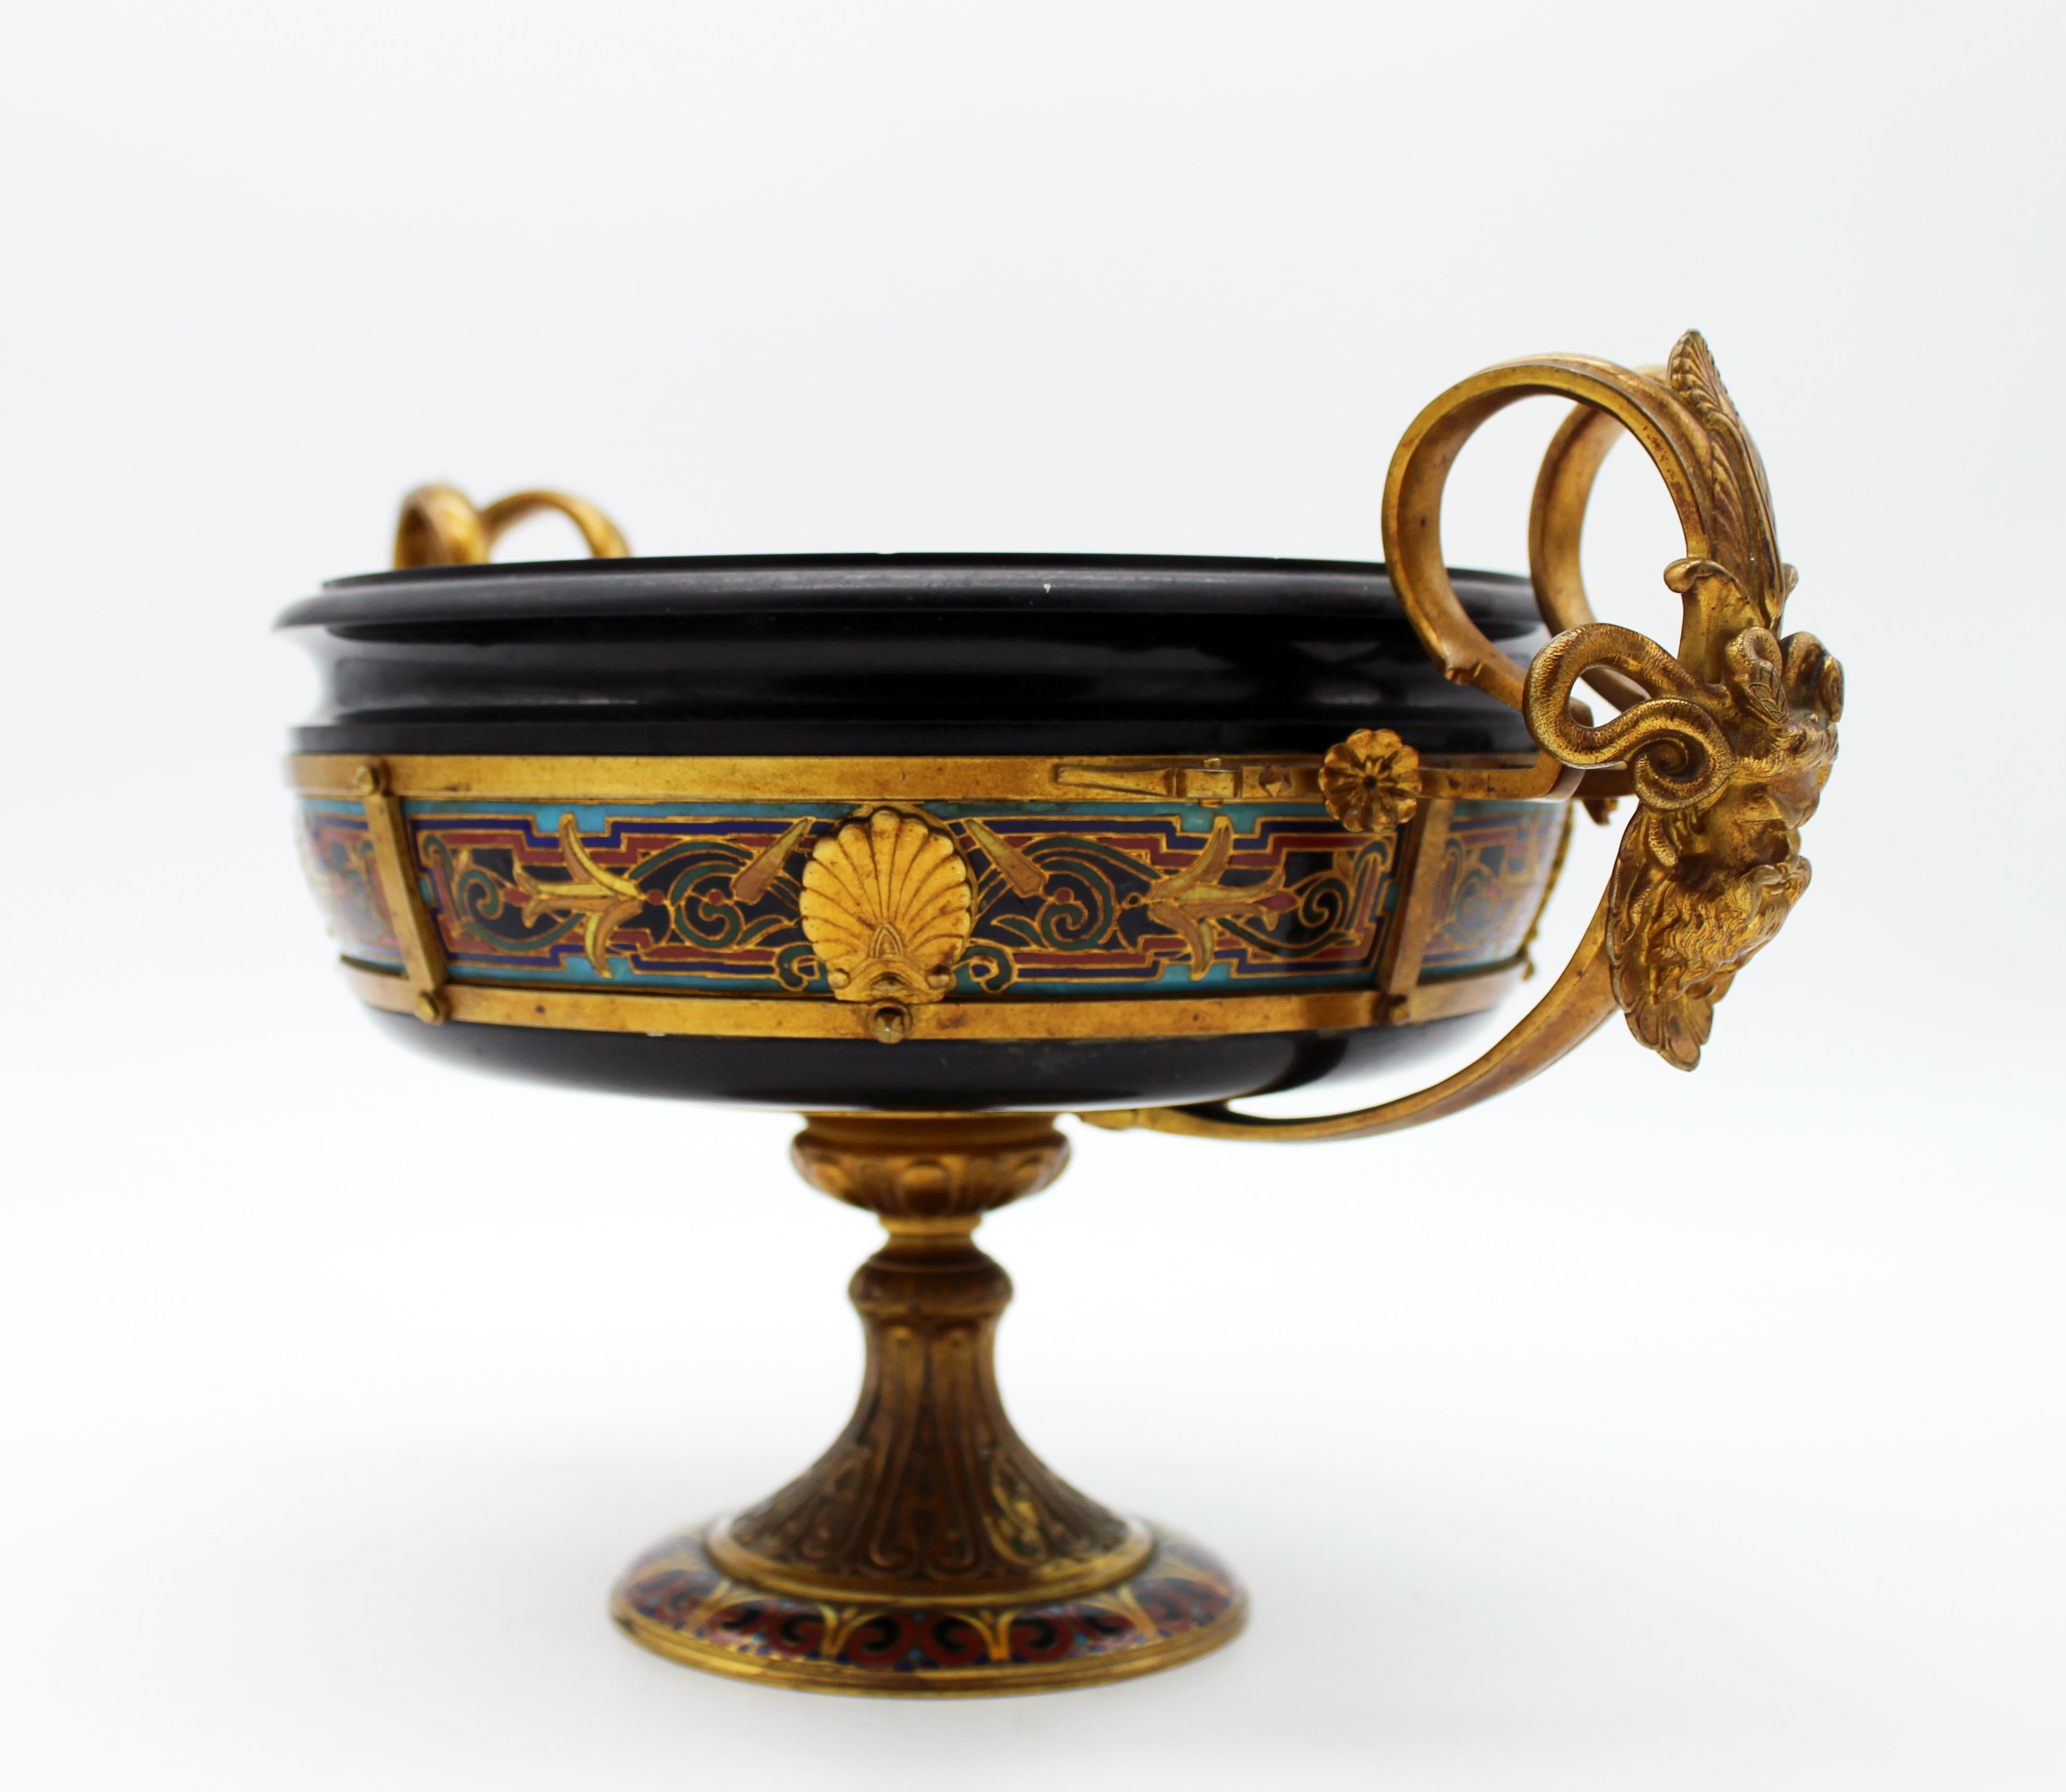 Hand-Carved Gold Bronze and Marble Tazza by Barbedienne Attributed to Louis Constant Sevine